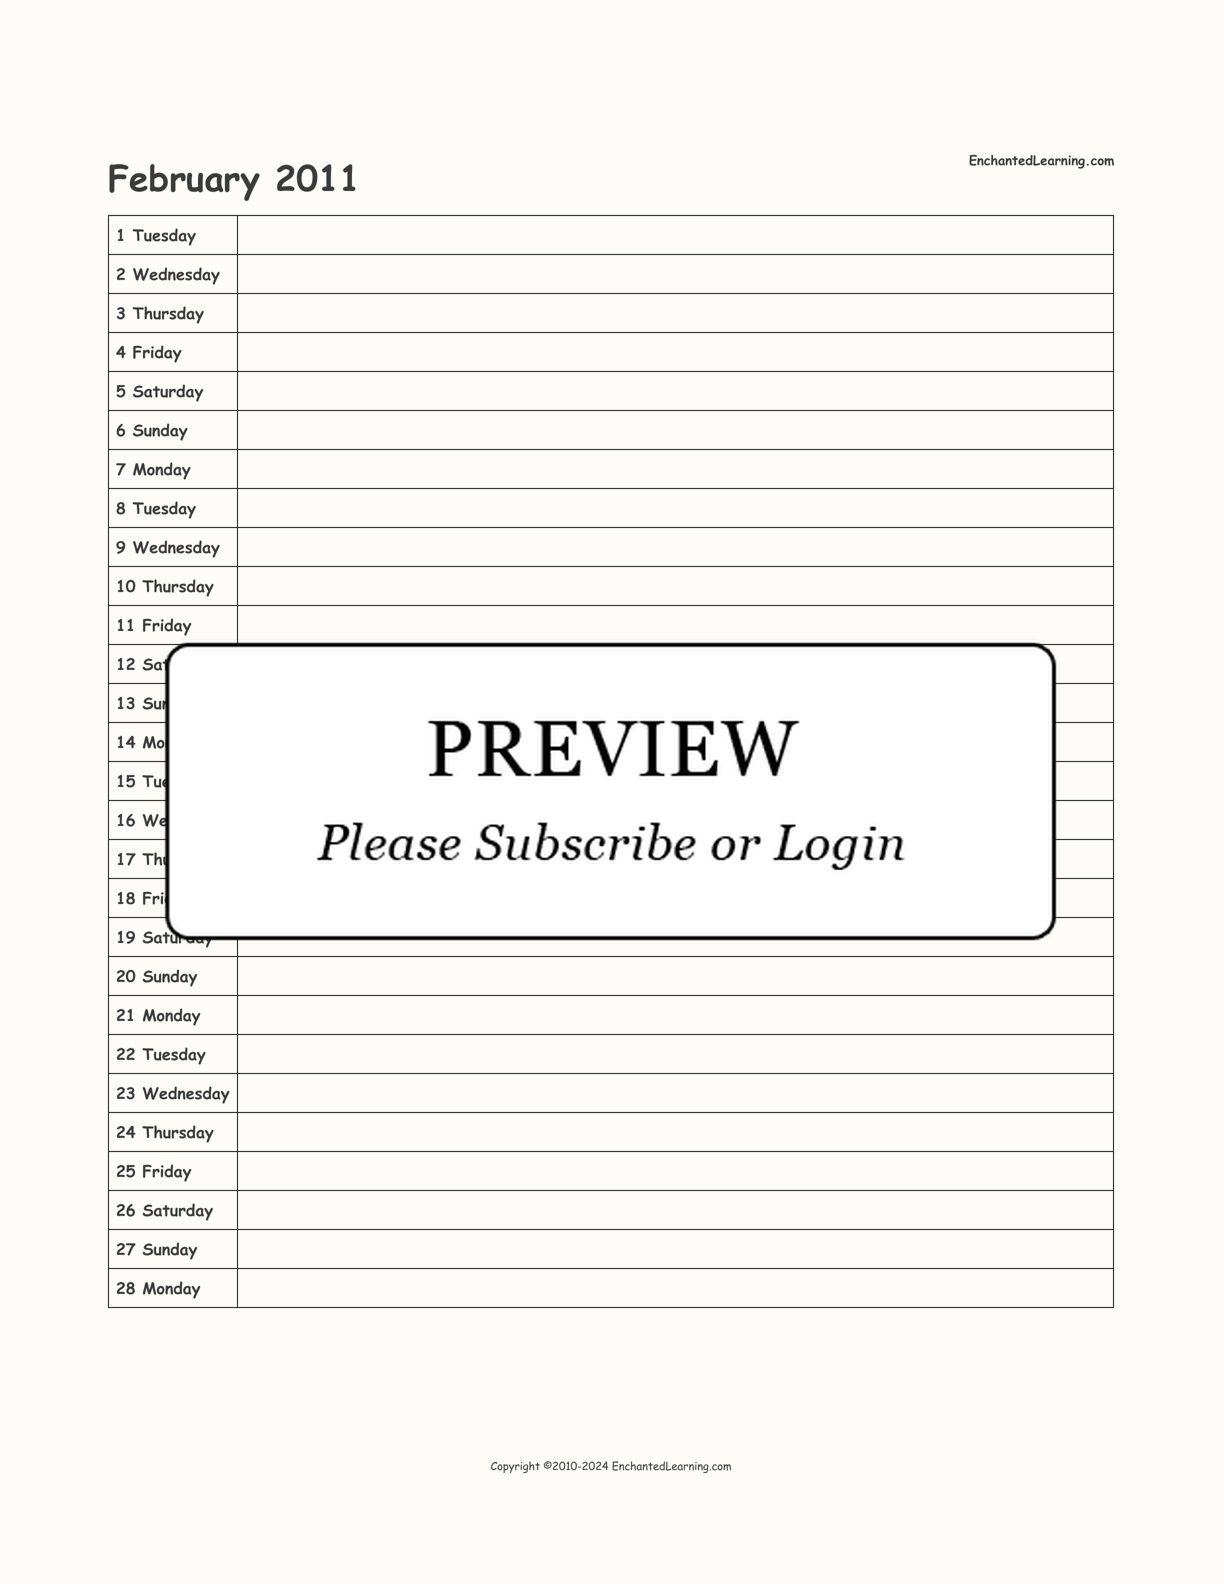 2011 Scheduling Calendar interactive printout page 2